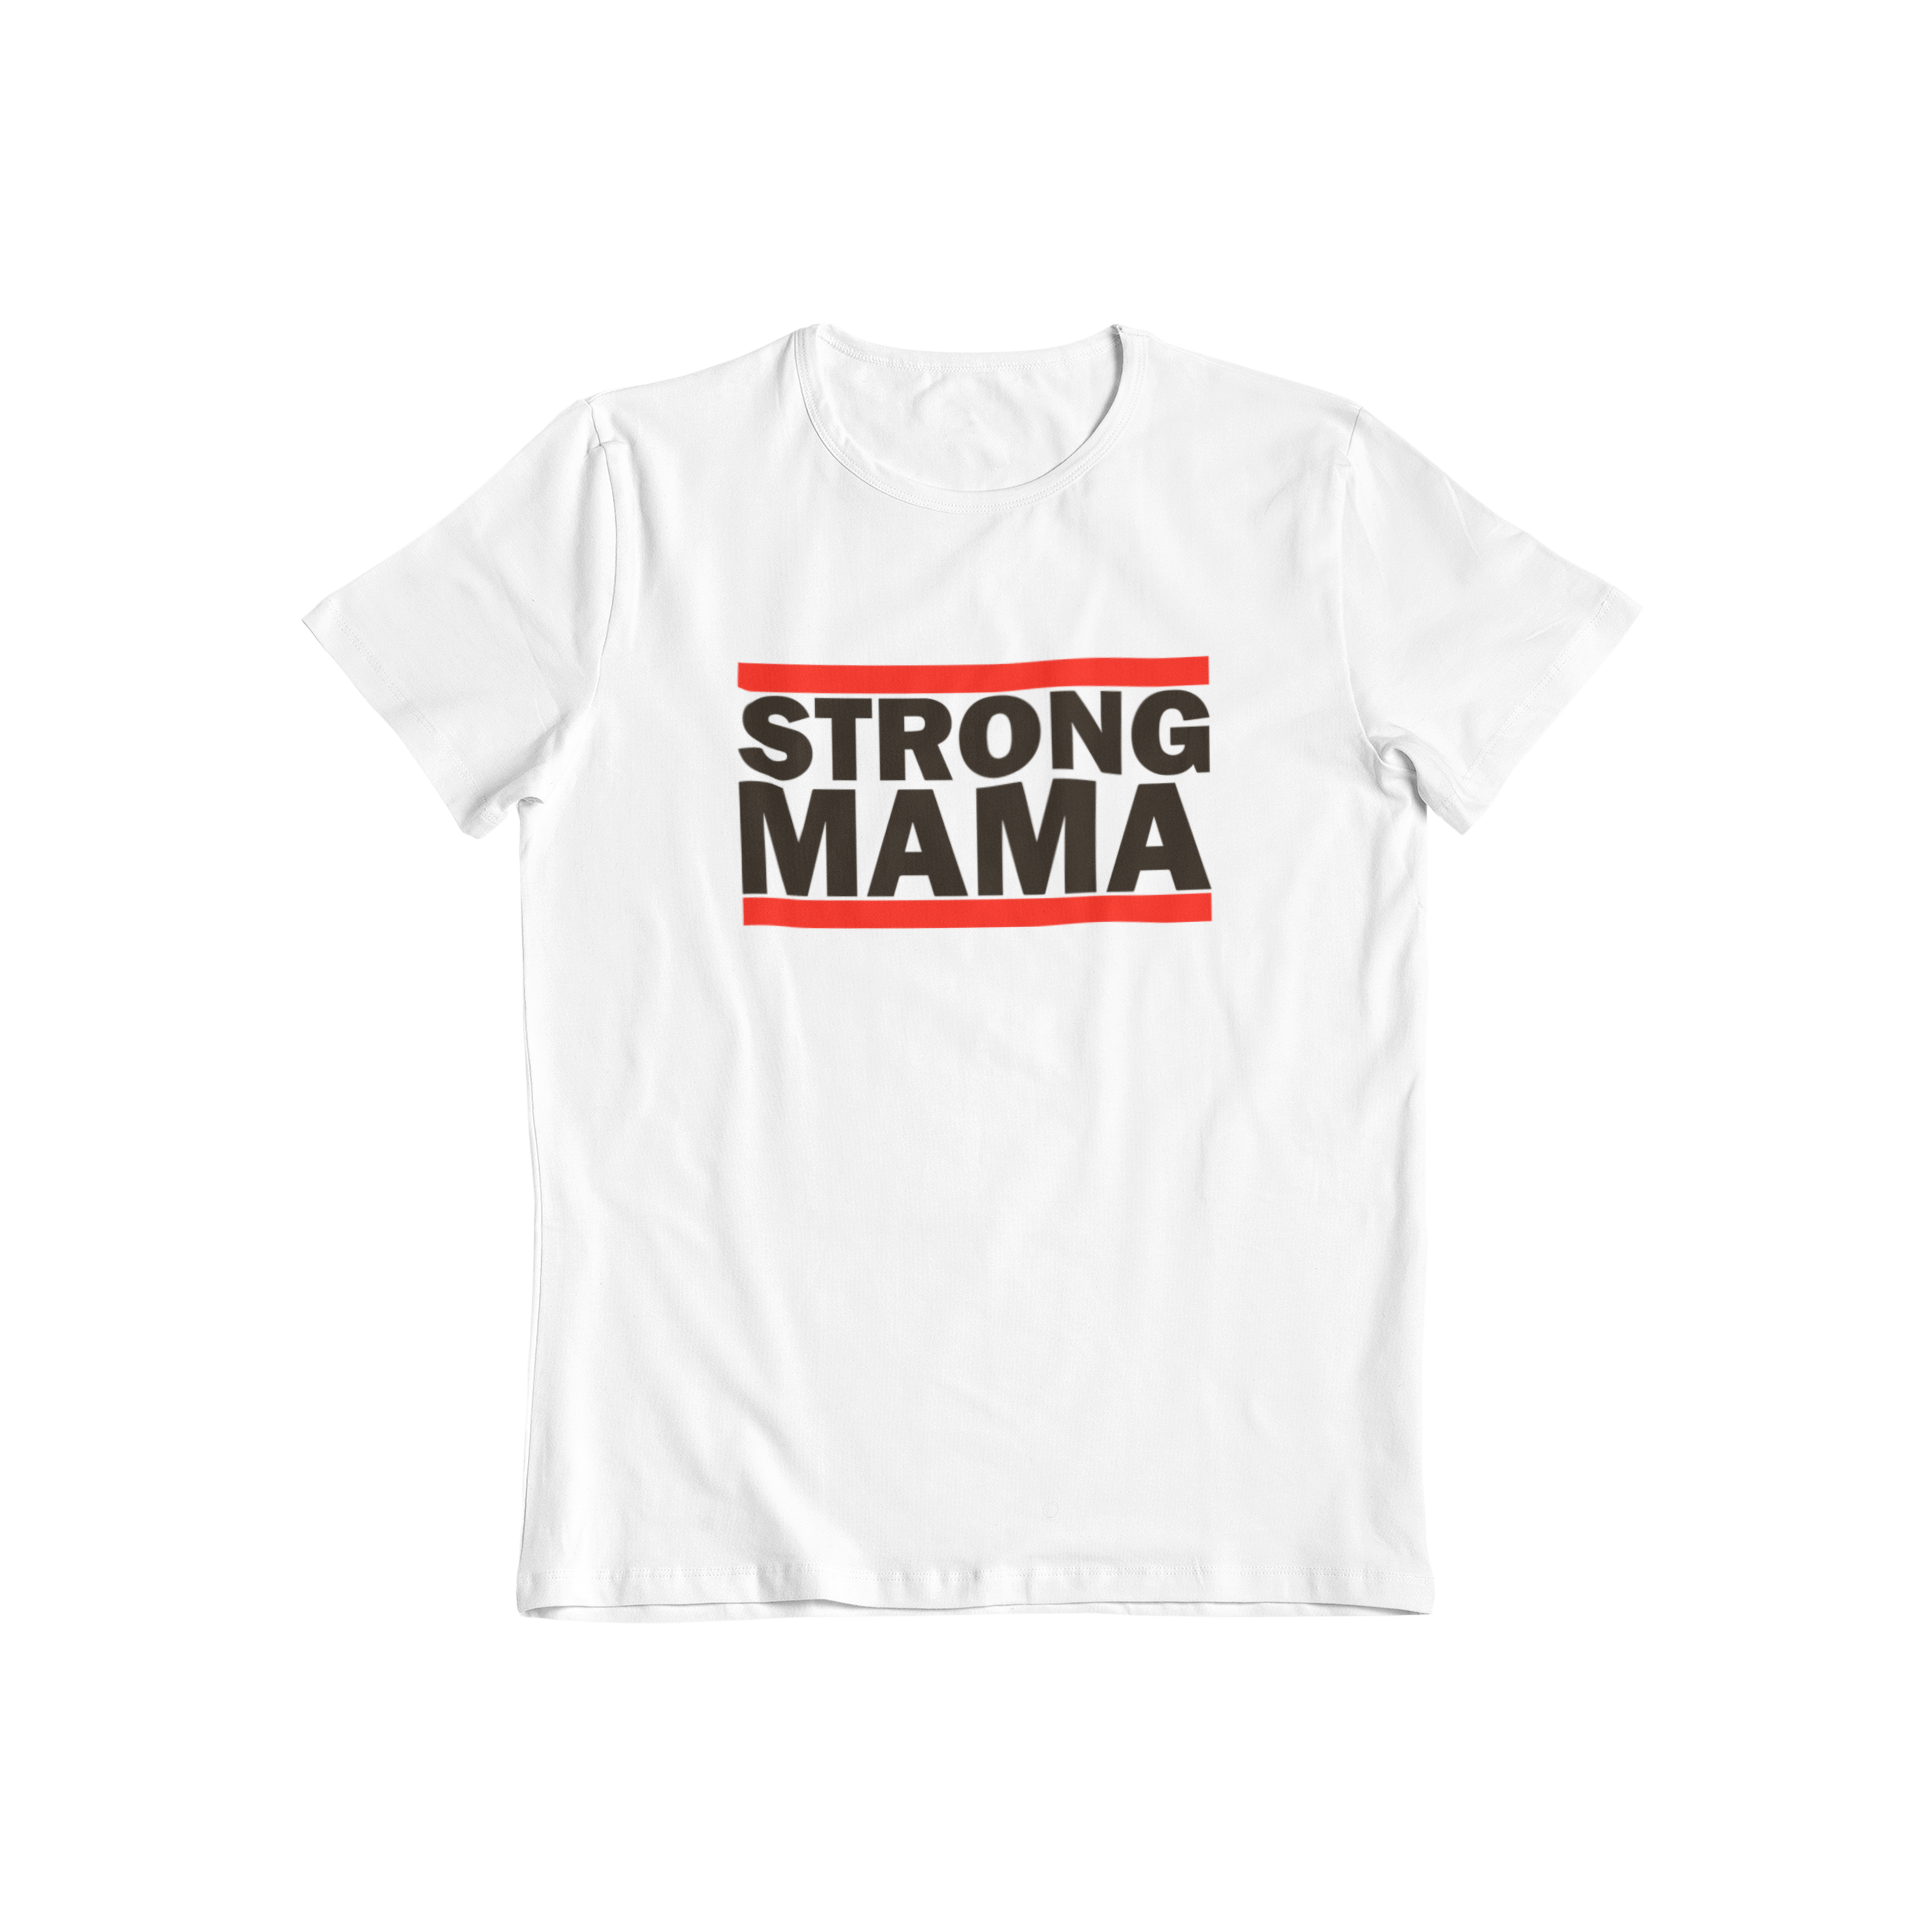 Looking for the perfect gift for Mum? Teevolution has got you covered with their Strong Mama slogan t-shirt. This t-shirt is a perfect way to show your appreciation and love for your strong mum. Get this comfortable and stylish t-shirt now, and let your Mum know she is loved!